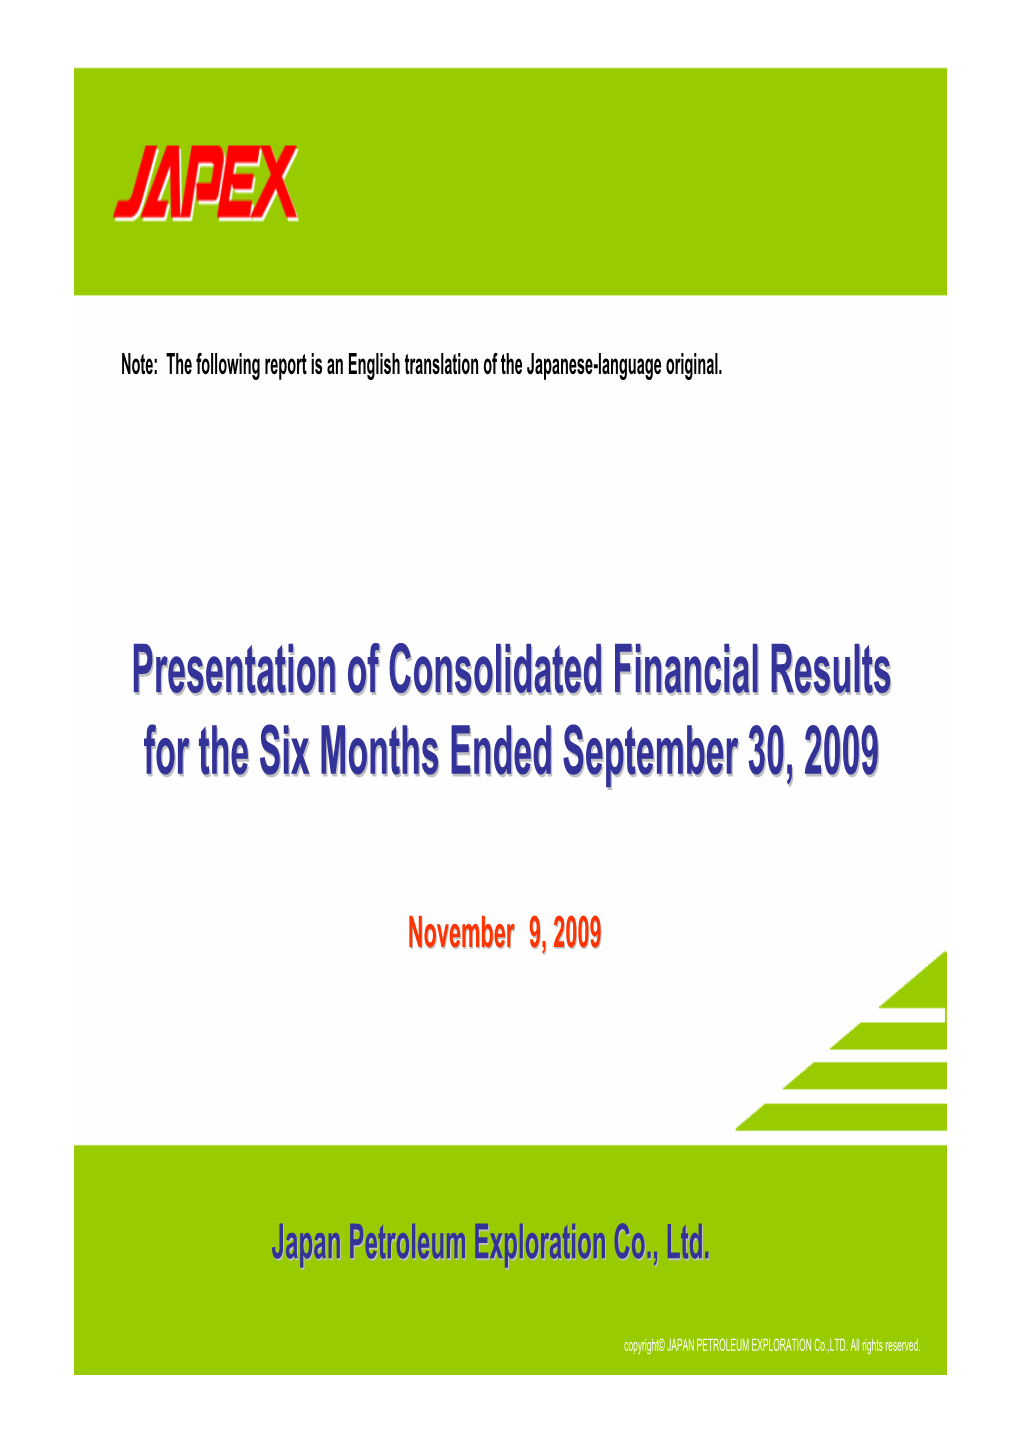 Presentation of Consolidated Financial Results for the Six Months